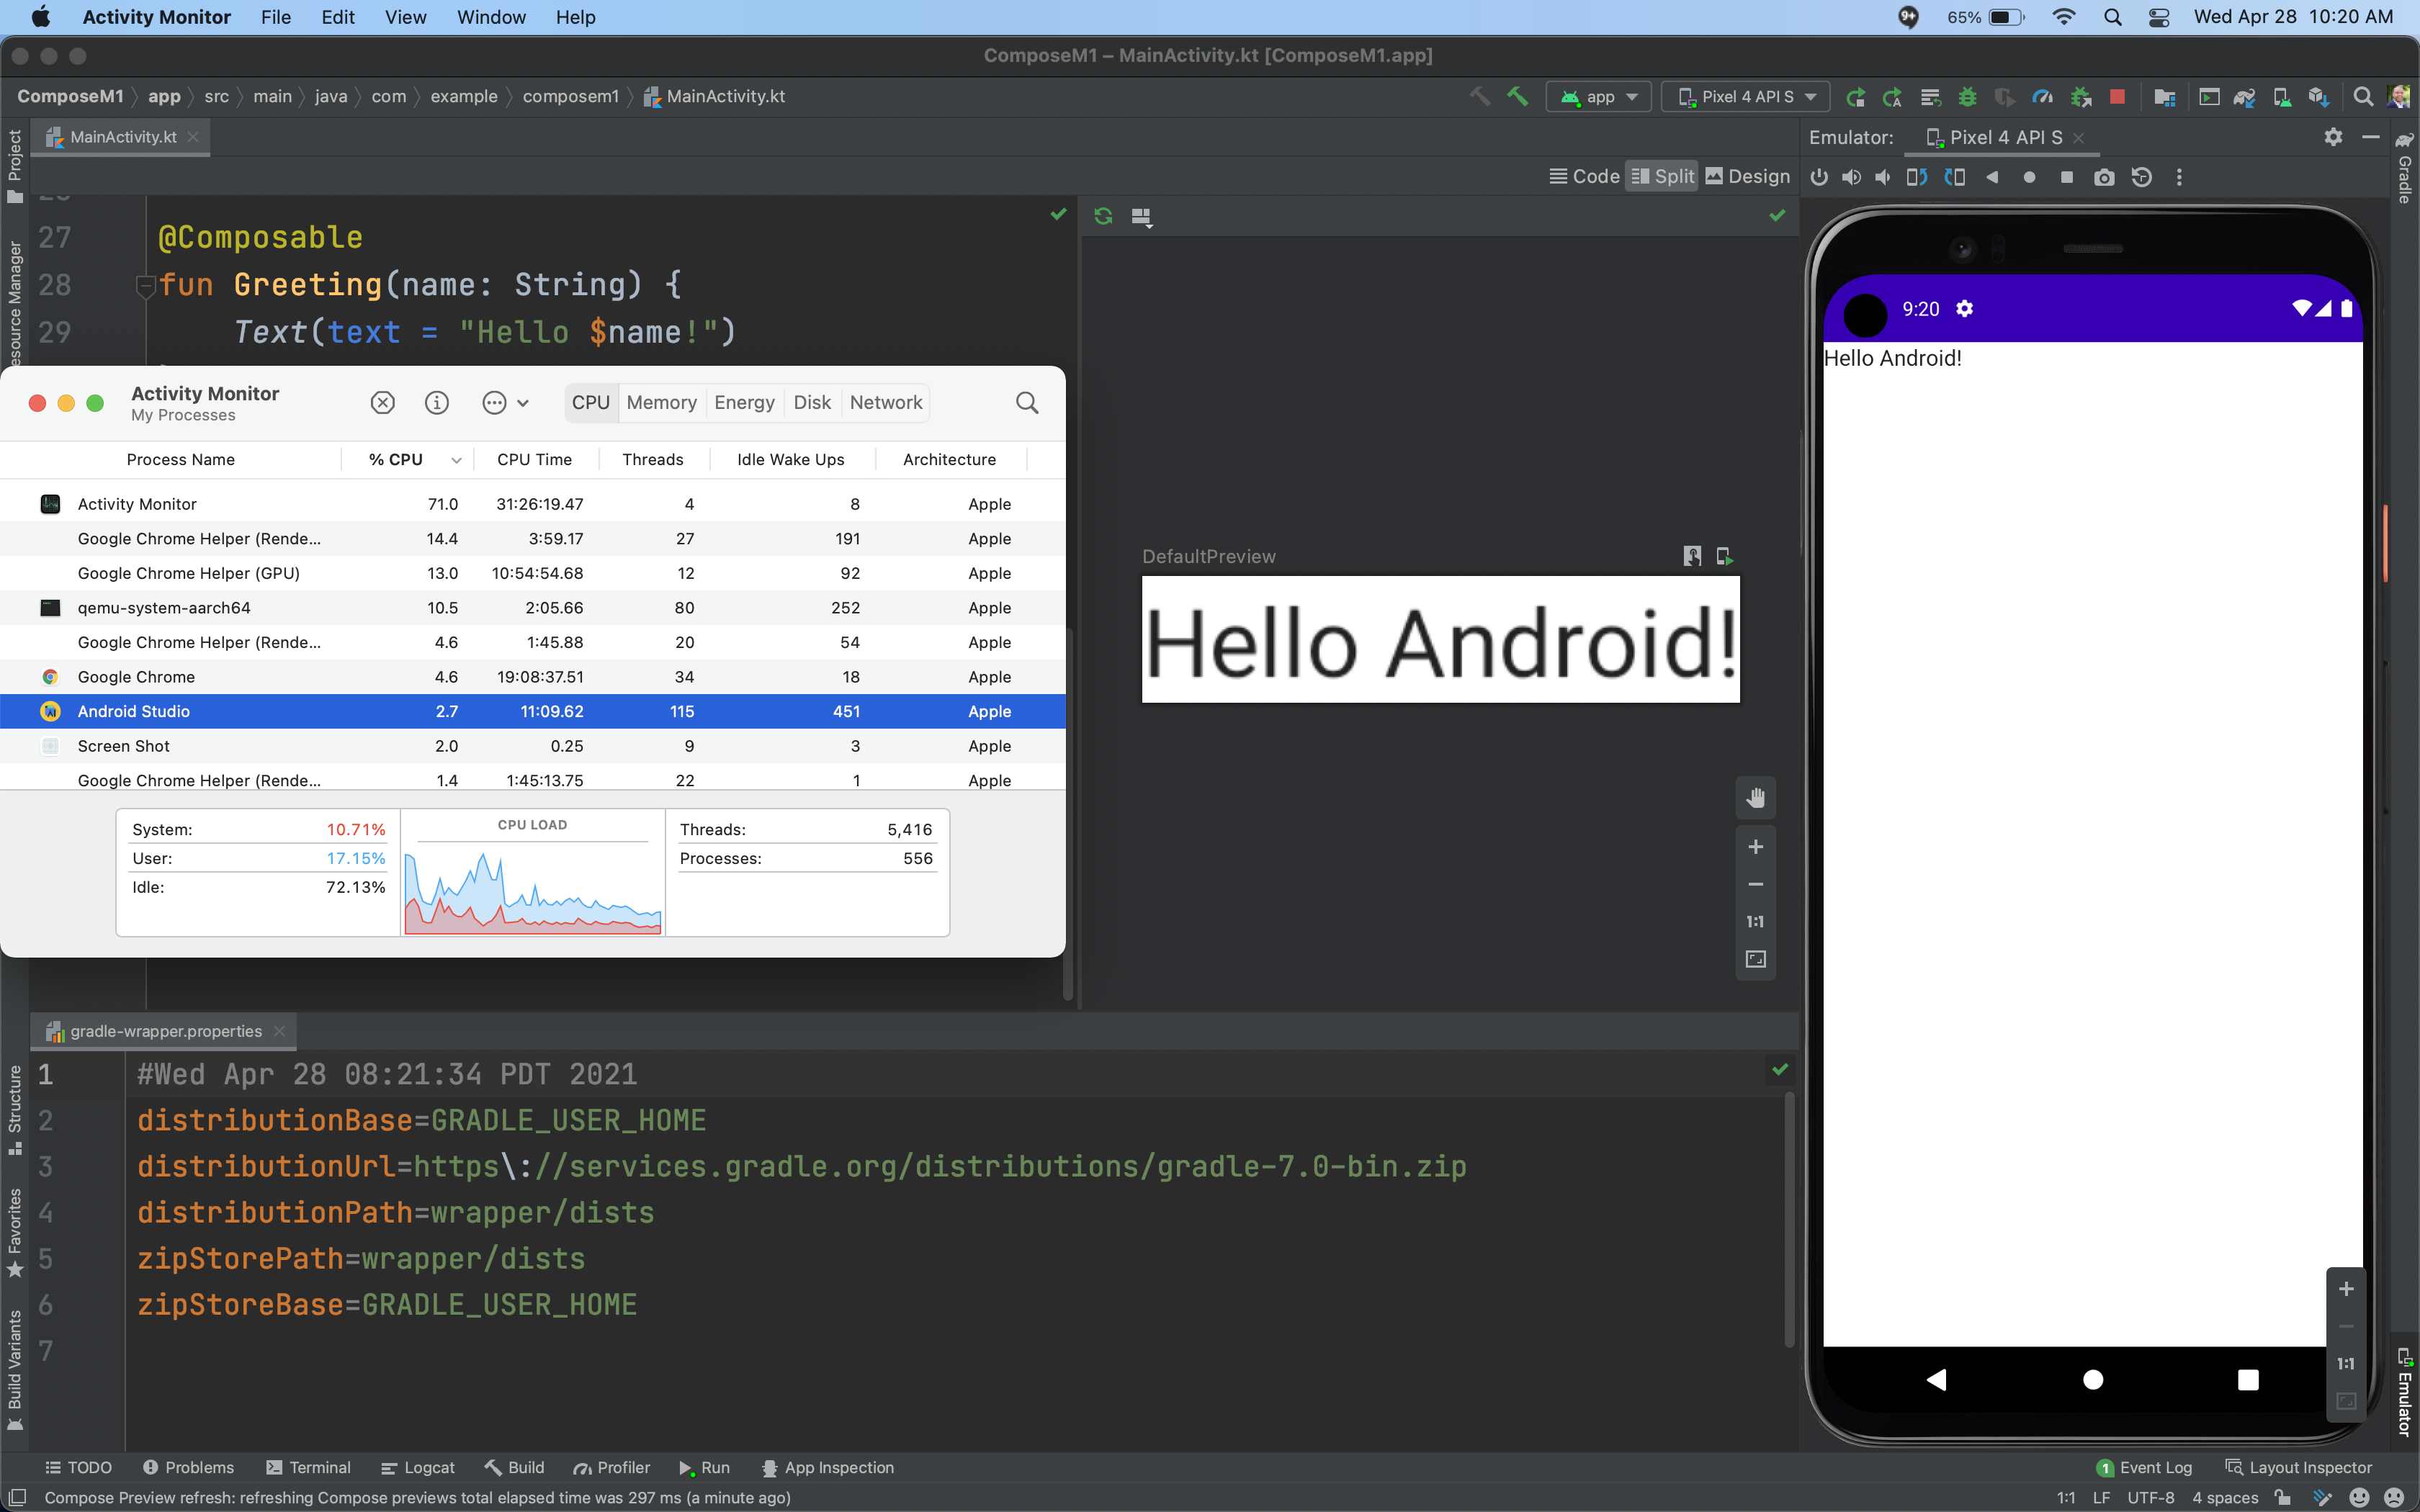 Android Studio Release Notes Android Developers